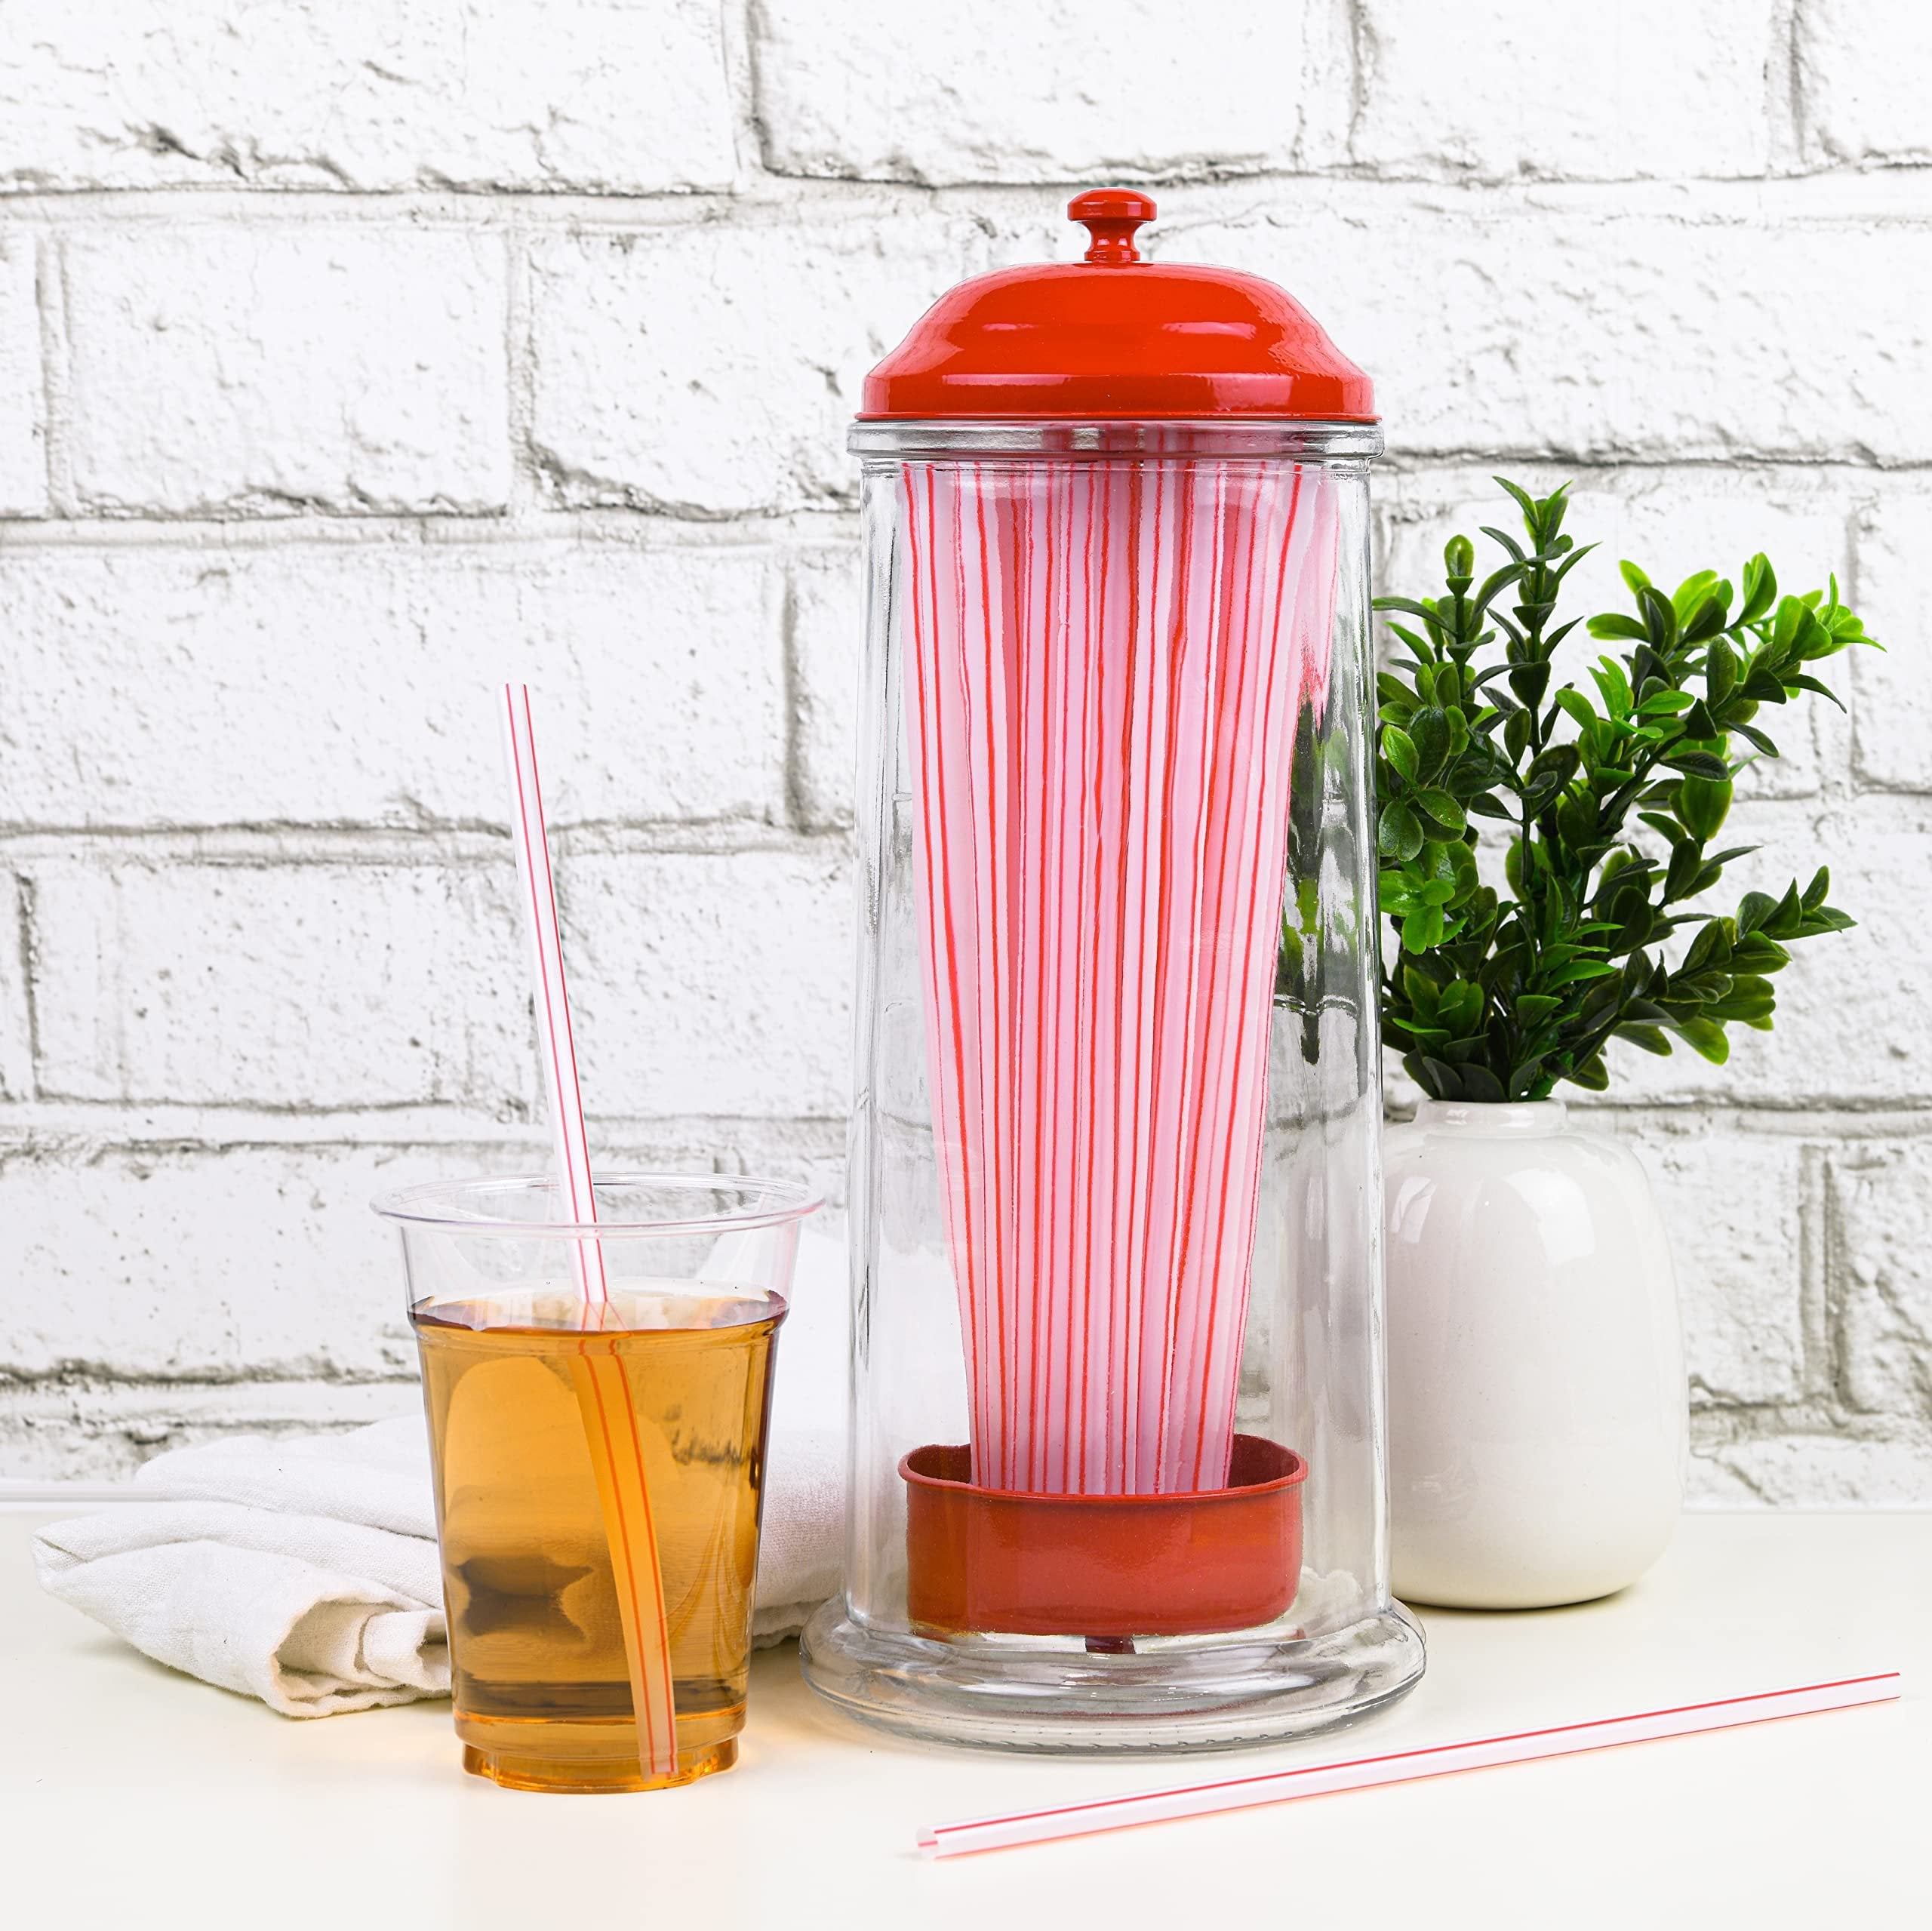 GADGETWIZ Red Glass Straw Dispenser w/ Stainless Steel Lid | Holds Straws up to 8.5 | Free Shipping & Returns"